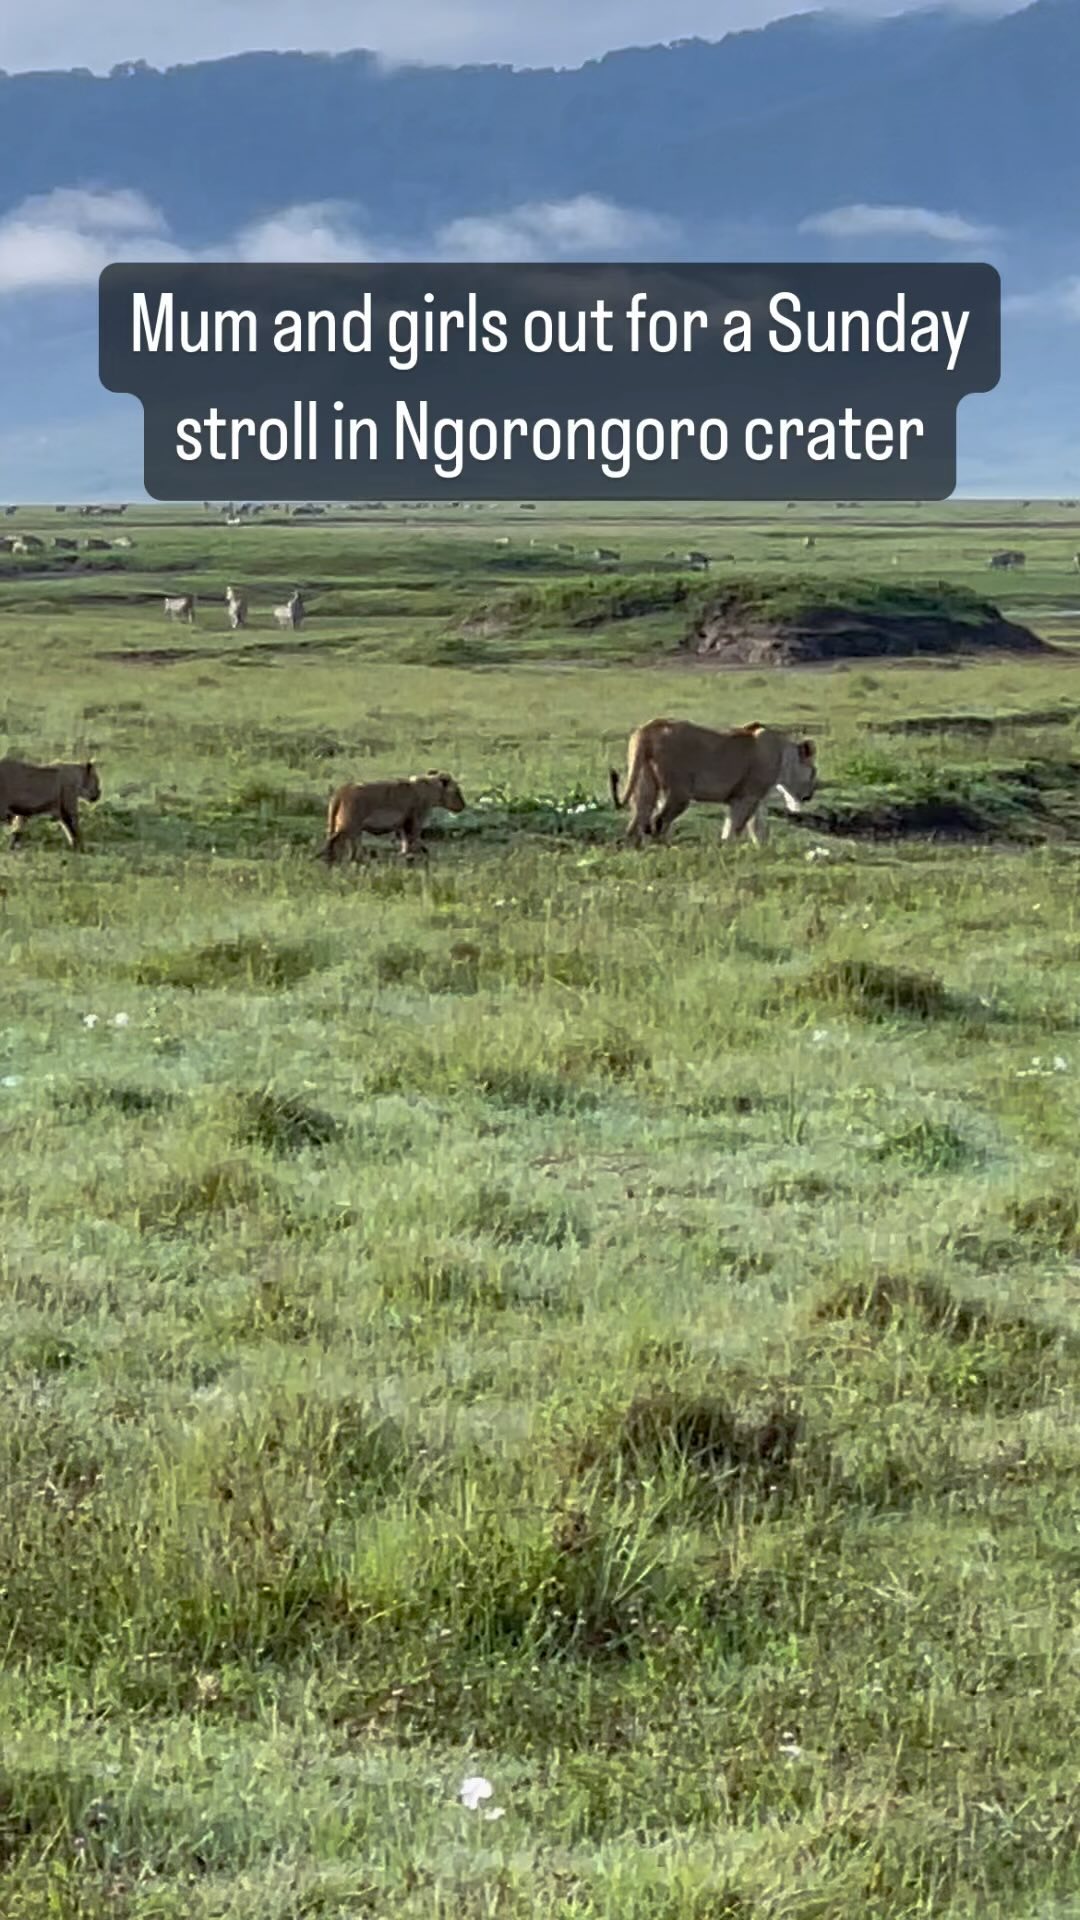 #lion Mum and #cubs out for a stroll on a sunny Sunday morning in #ngorongorocrater #wildlife #safari #africa #tanzania